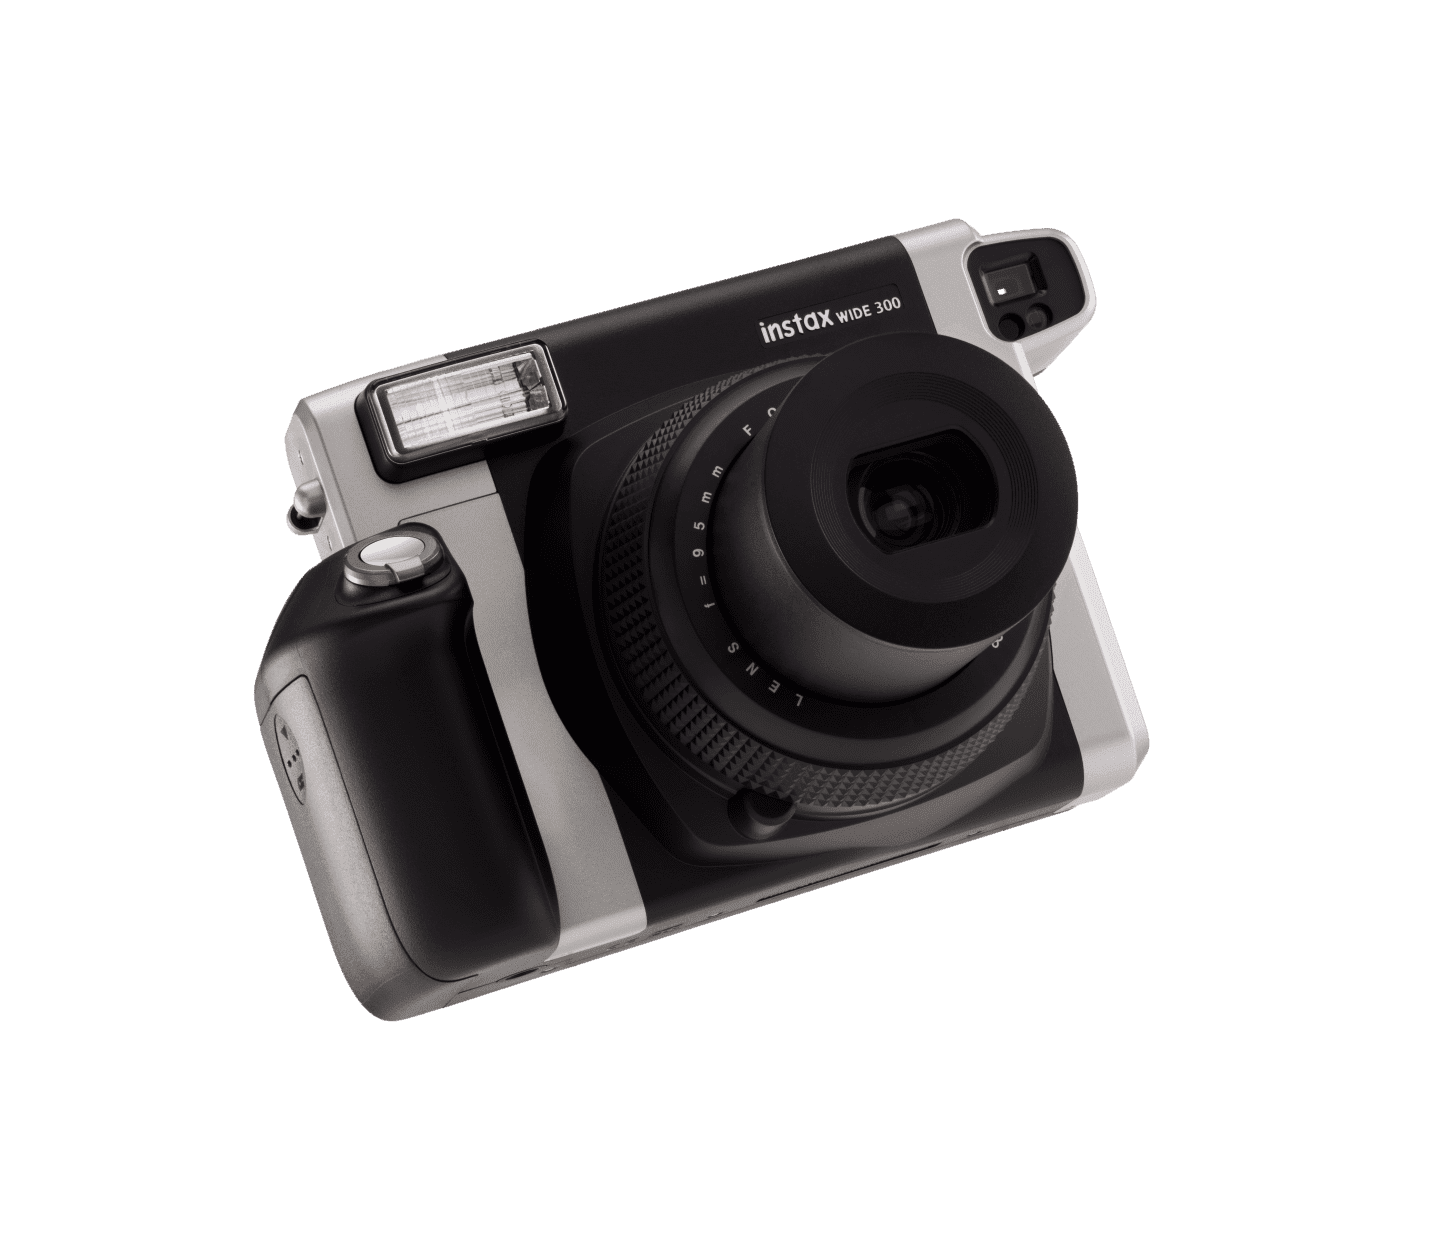 WIDE 300 Instant Camera instax Fujifilm by | Photography